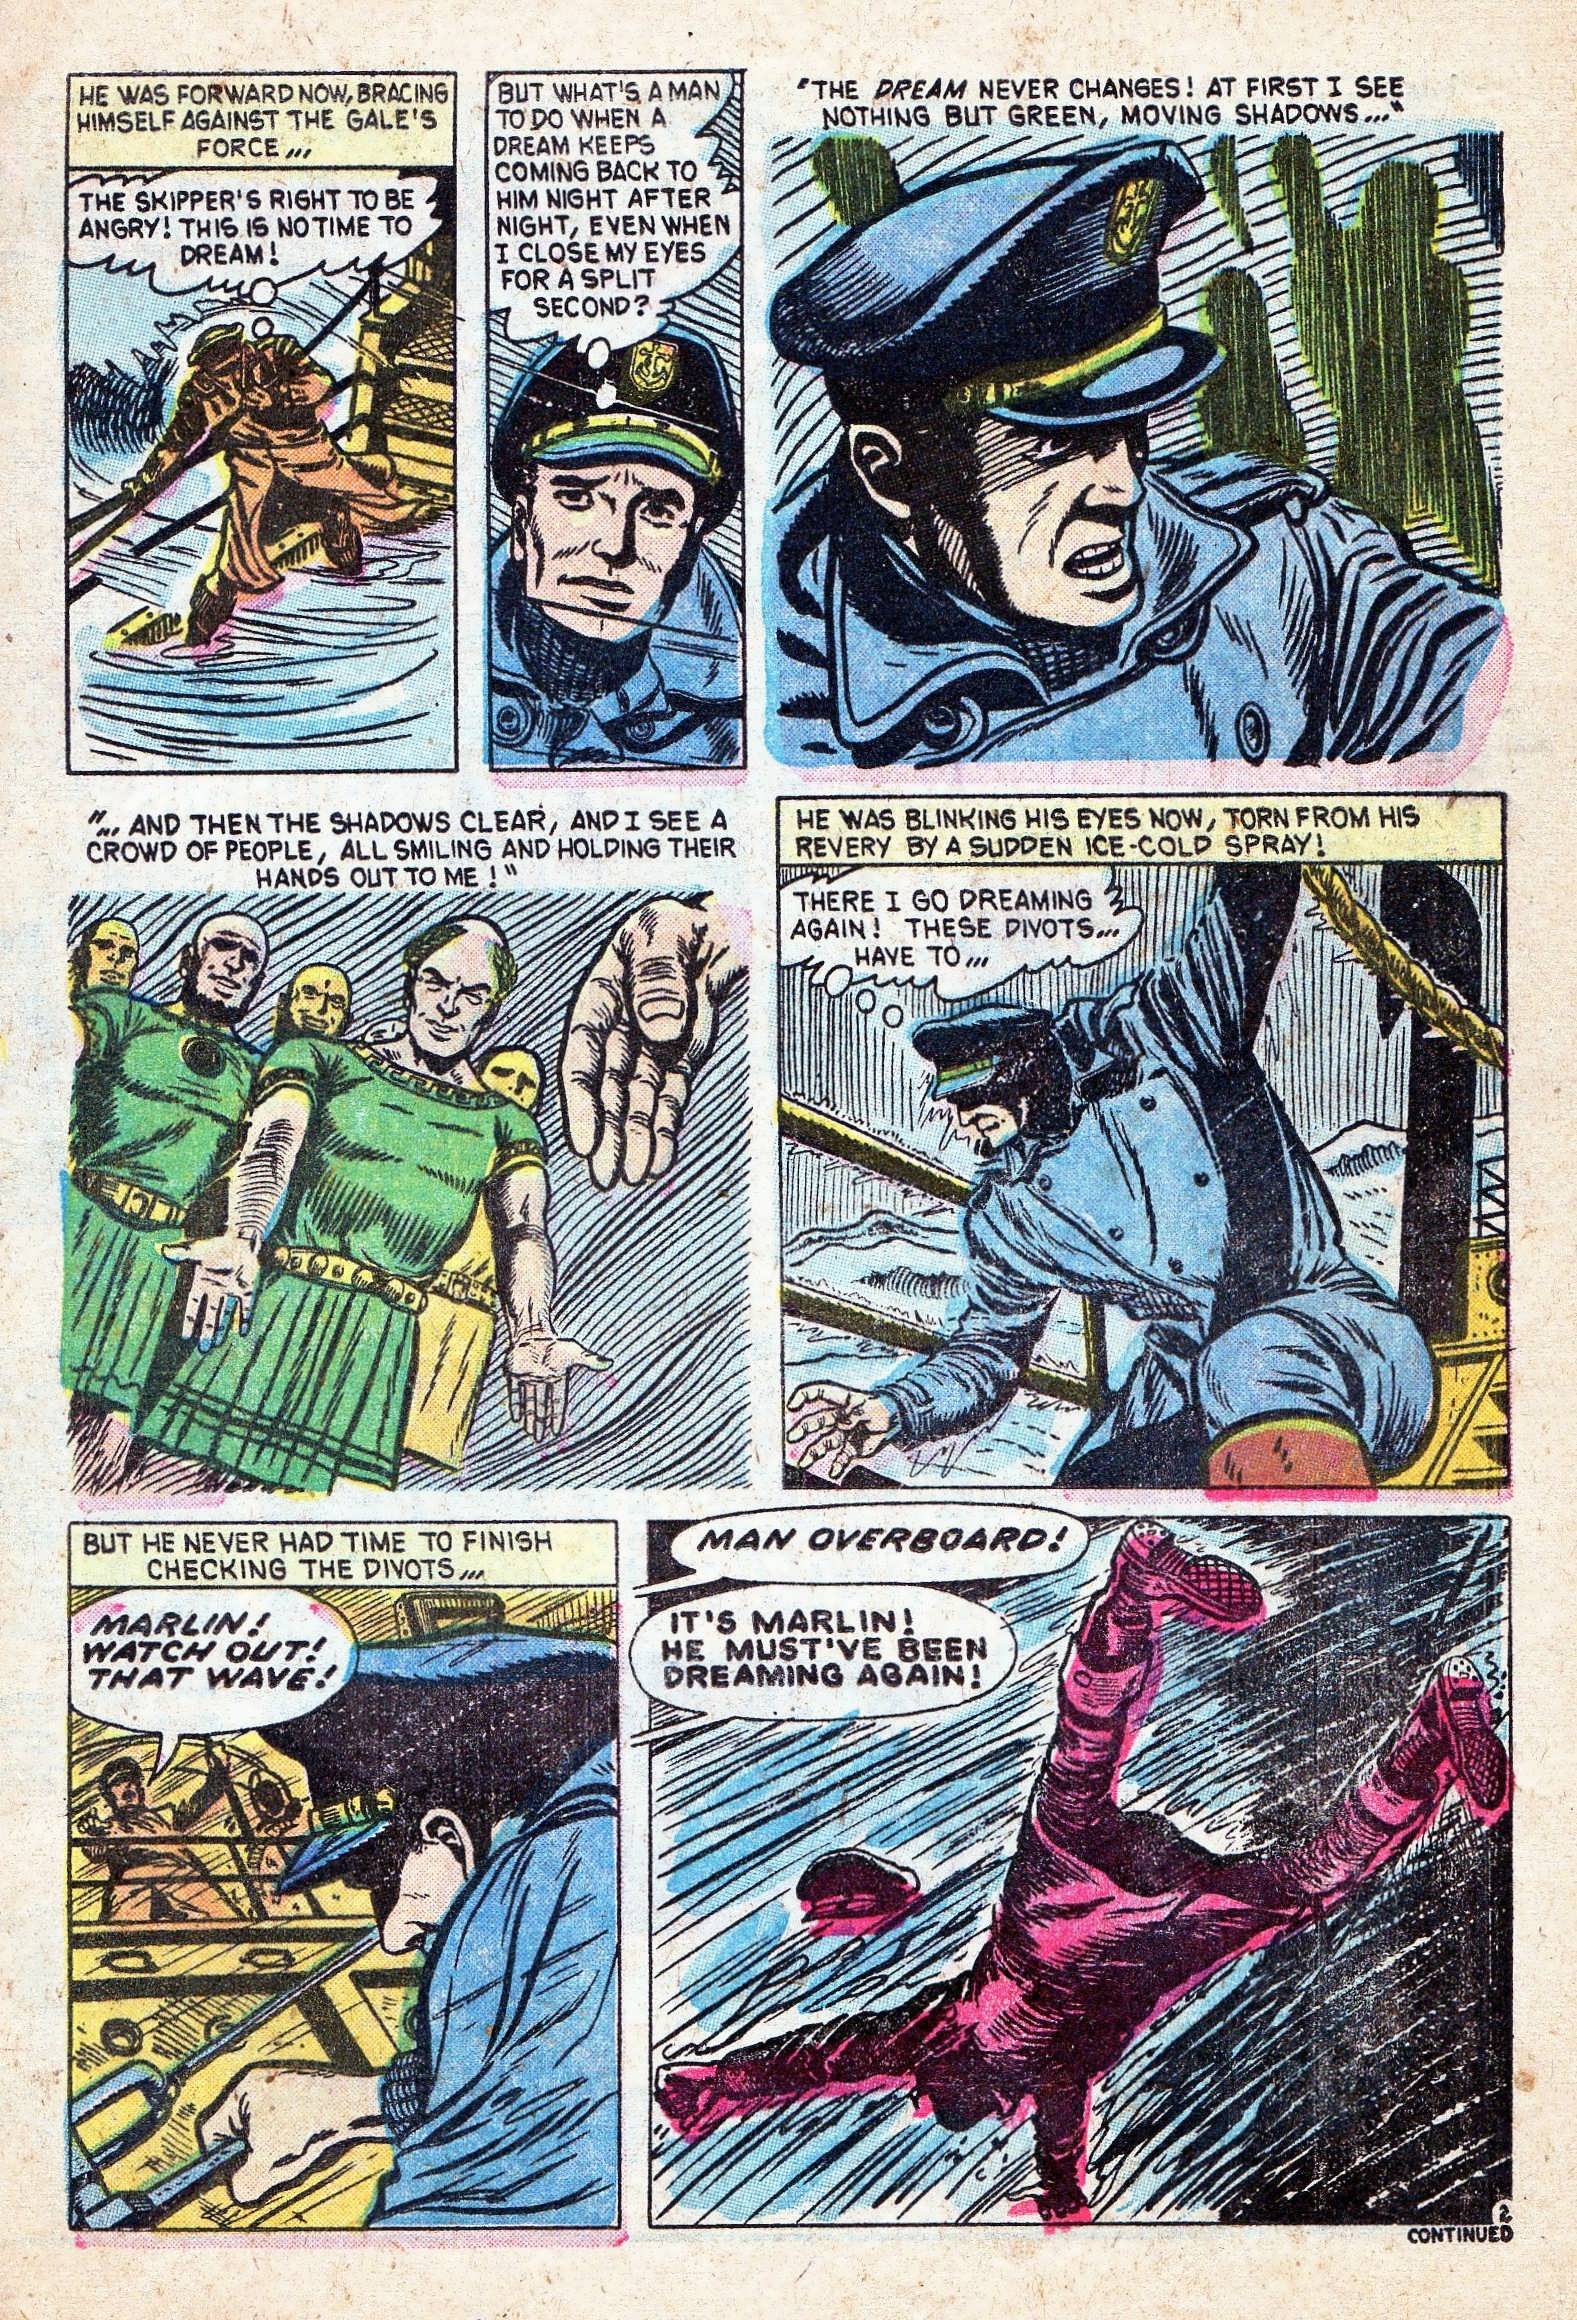 Marvel Tales (1949) 145 Page 16